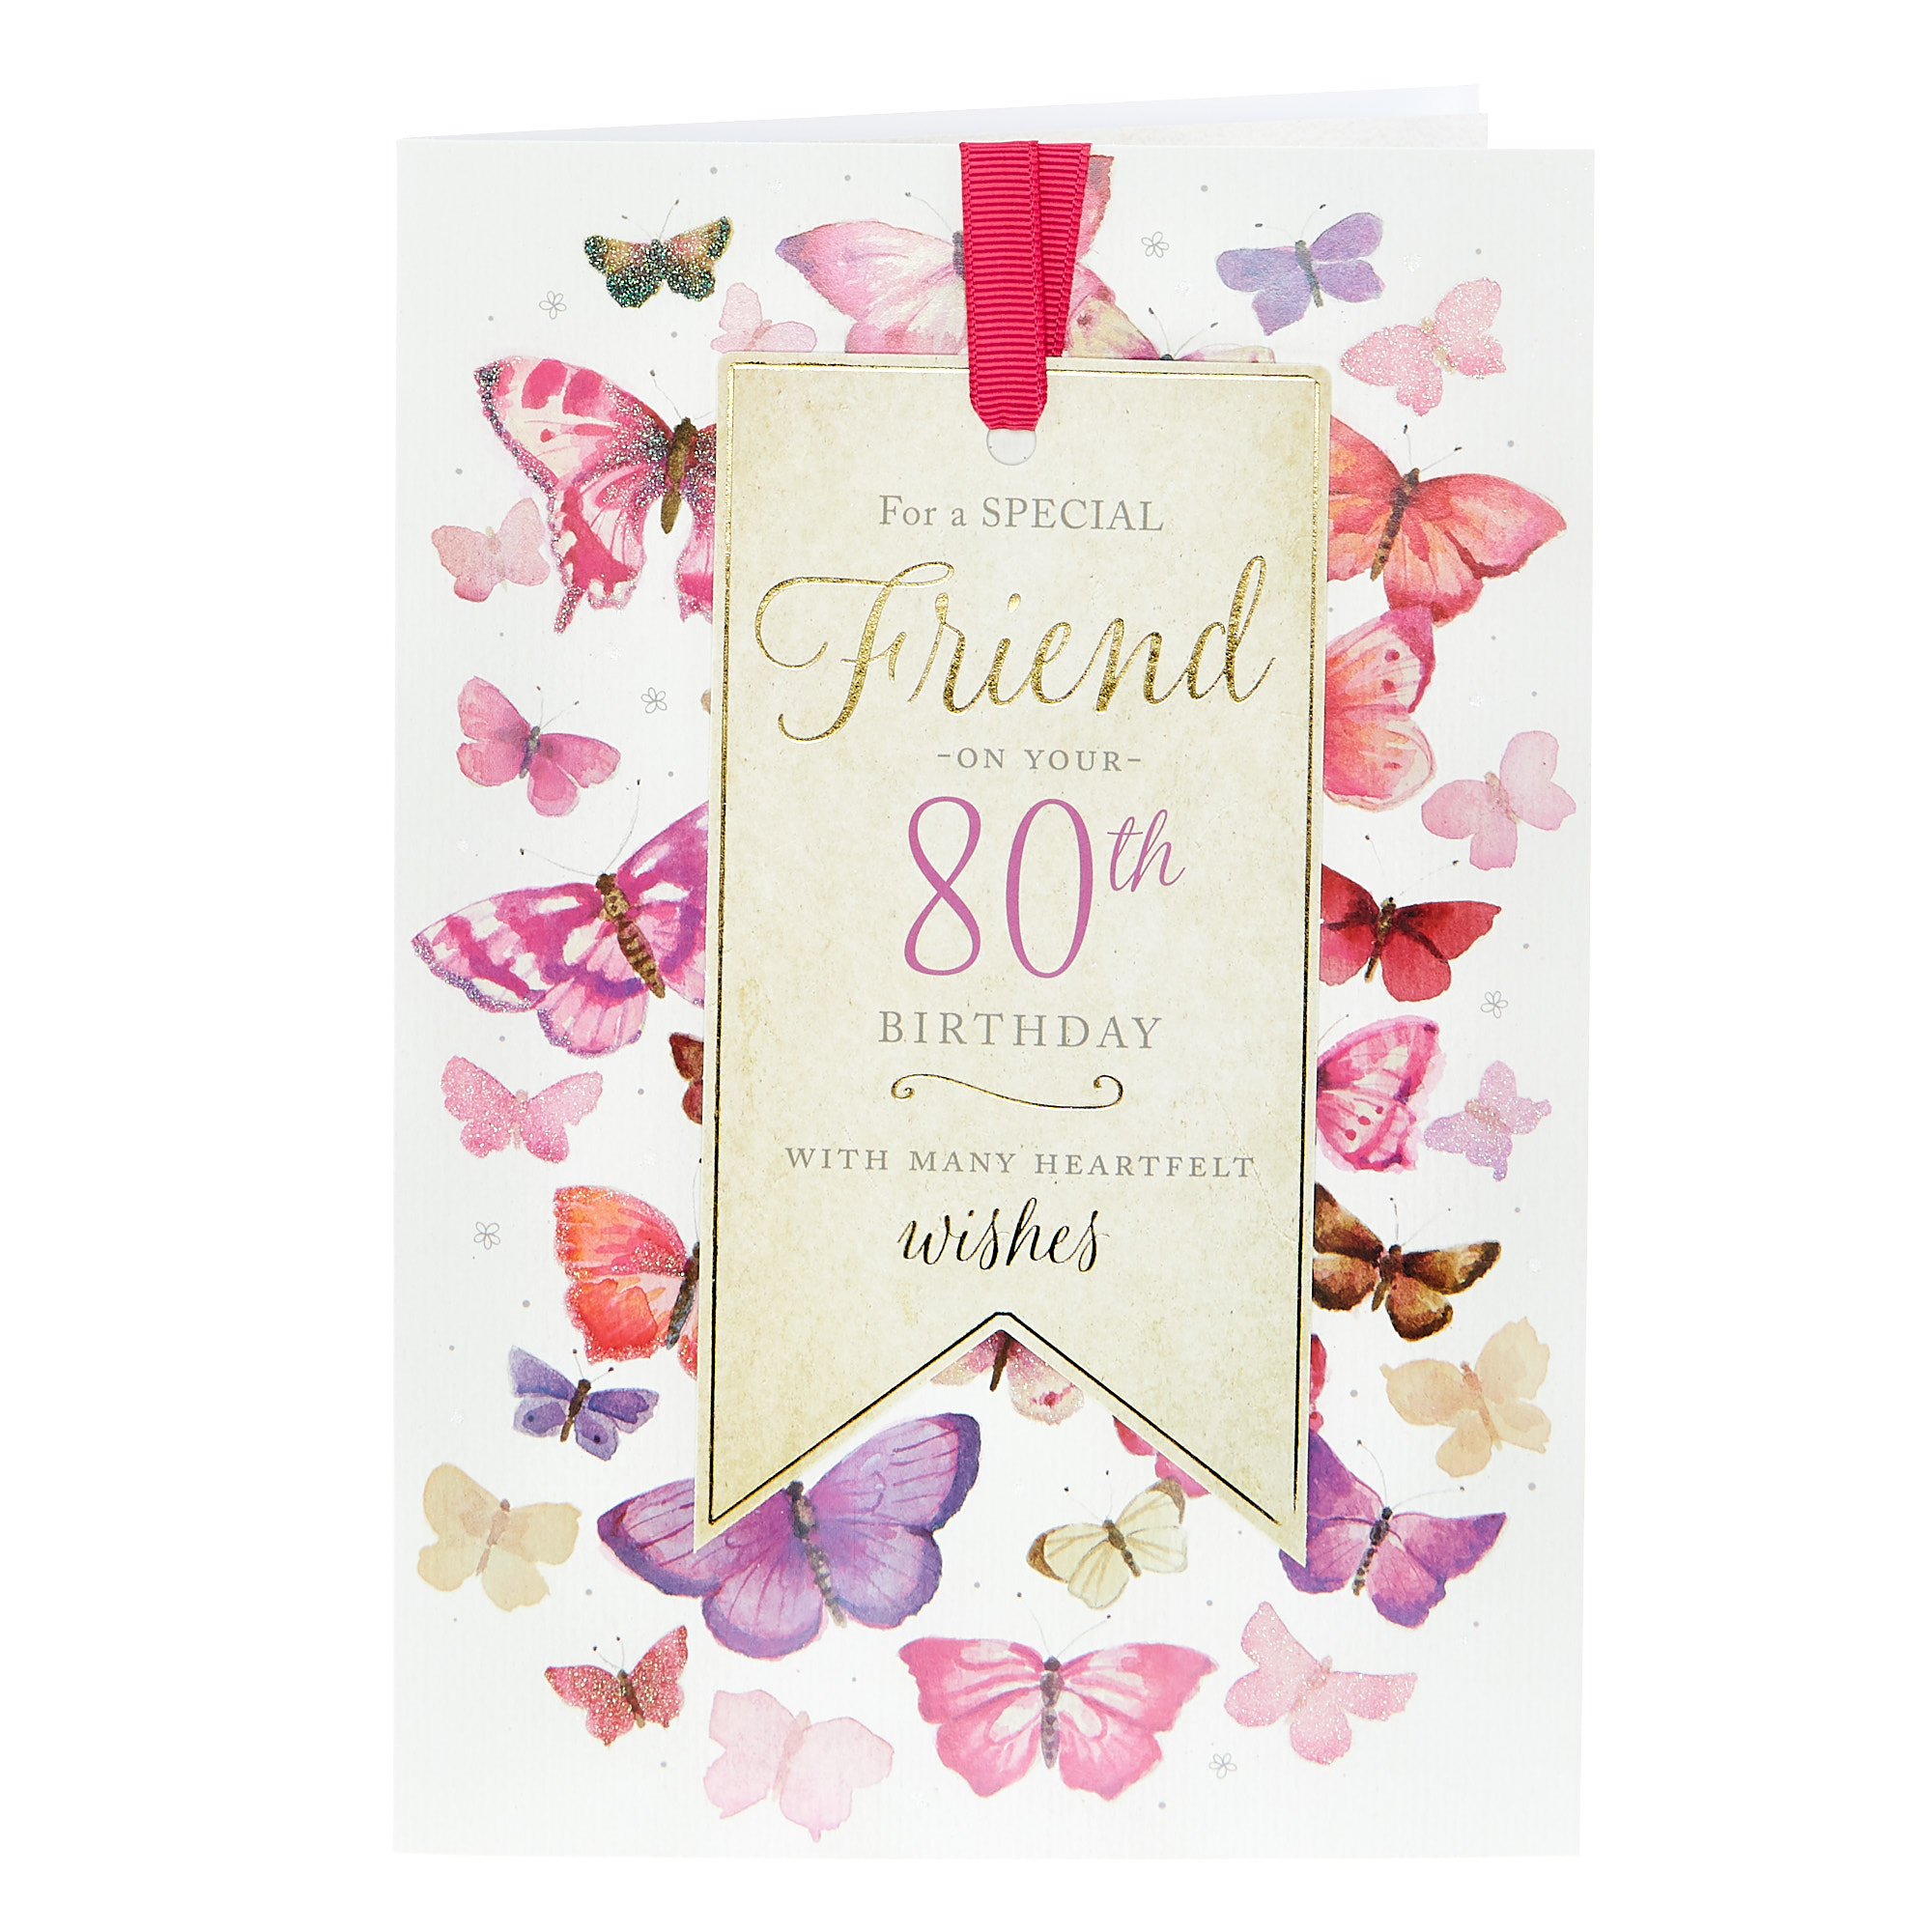 Buy 80th Birthday Card - For A Special Friend for GBP 1.29 | Card